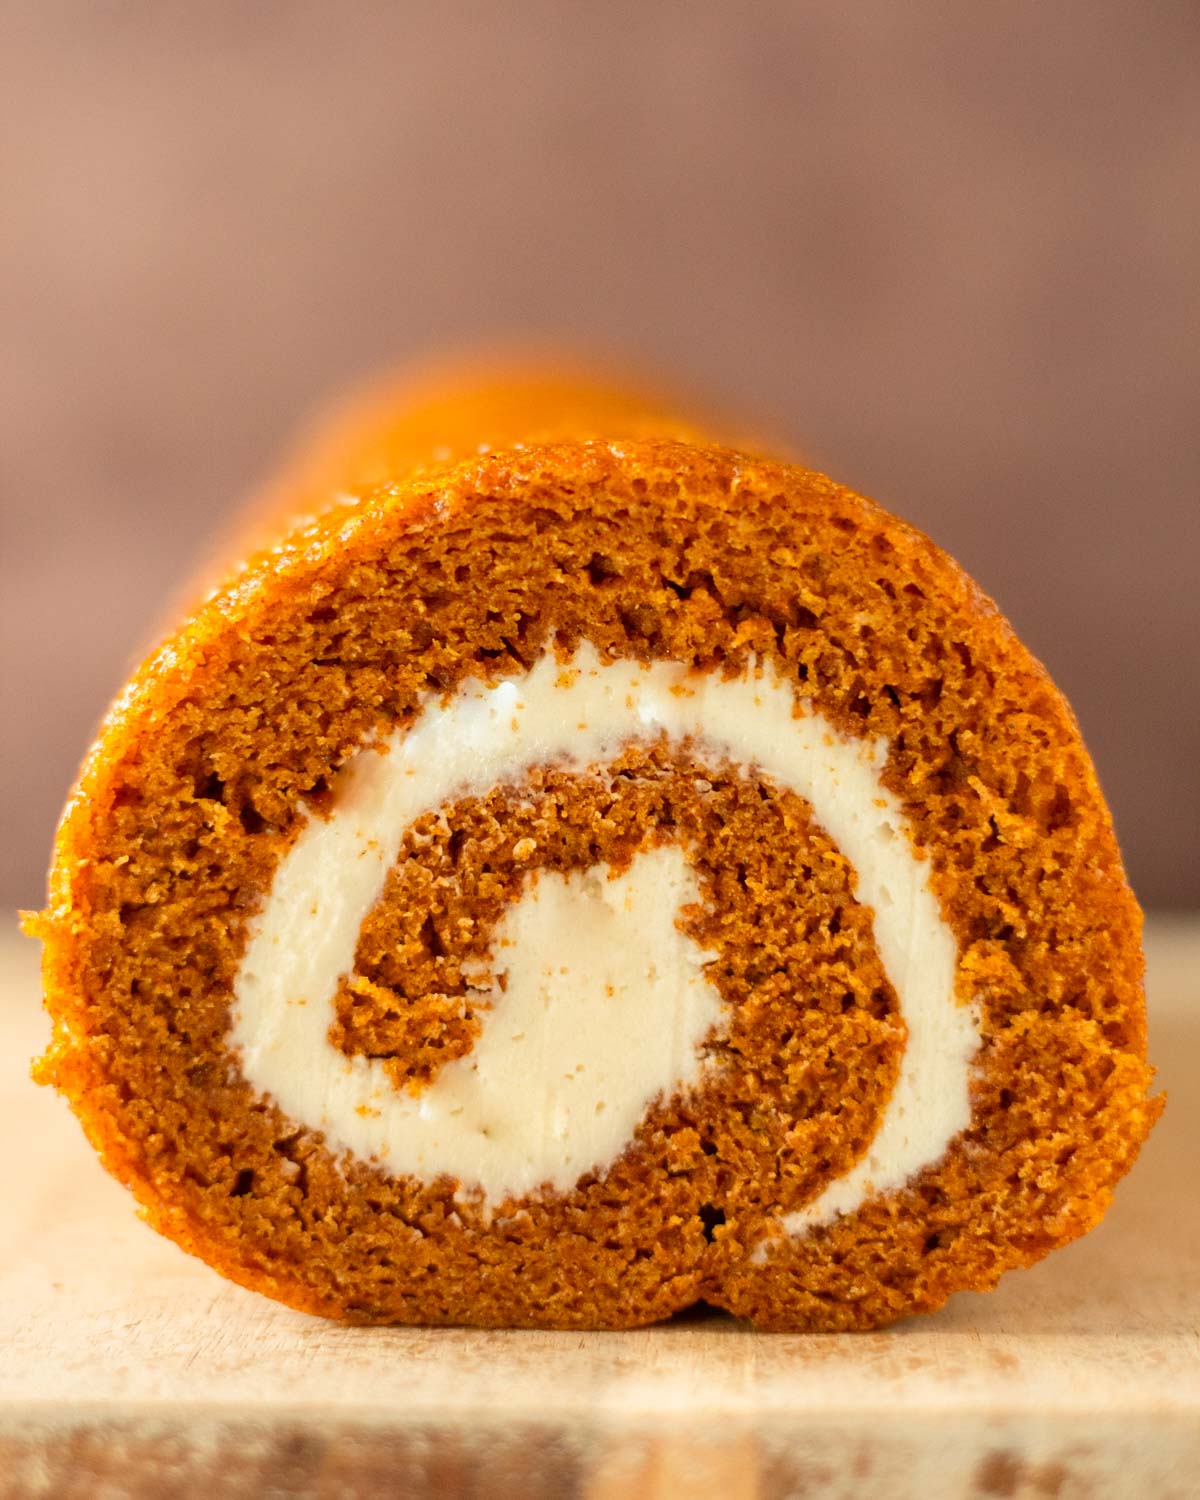 This pumpkin roll recipe is a simple pumpkin cake recipe filled with a homemade cream cheese frosting and rolled into a perfect spiral. This pumpkin roll cake with cream cheese filling is the perfect fall dessert and great for the holidays.